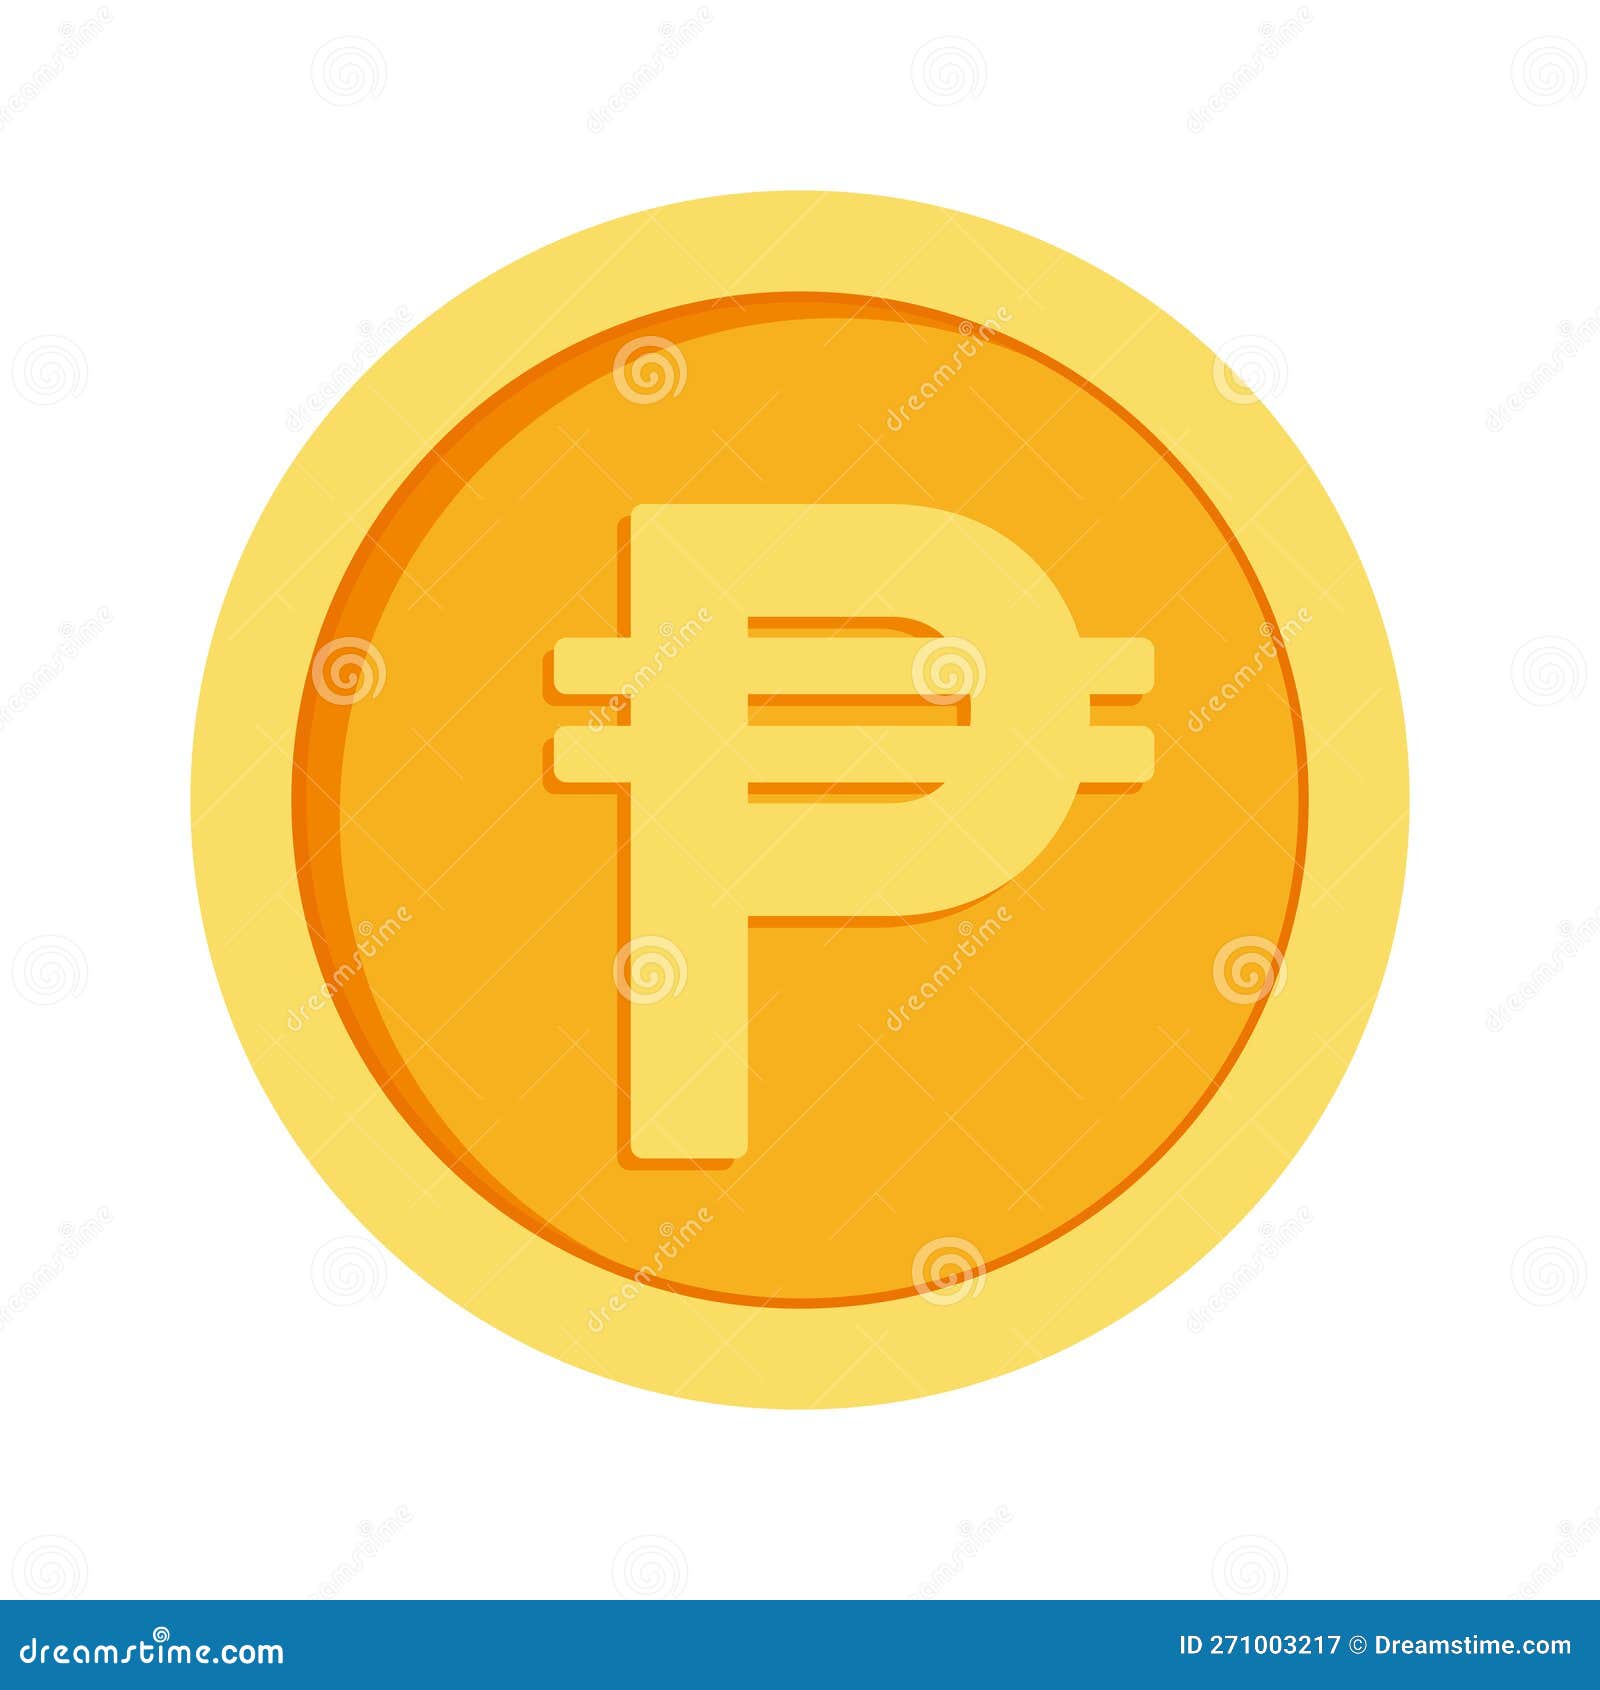 2, Philippine Coin Images, Stock Photos, 3D objects, & Vectors | Shutterstock